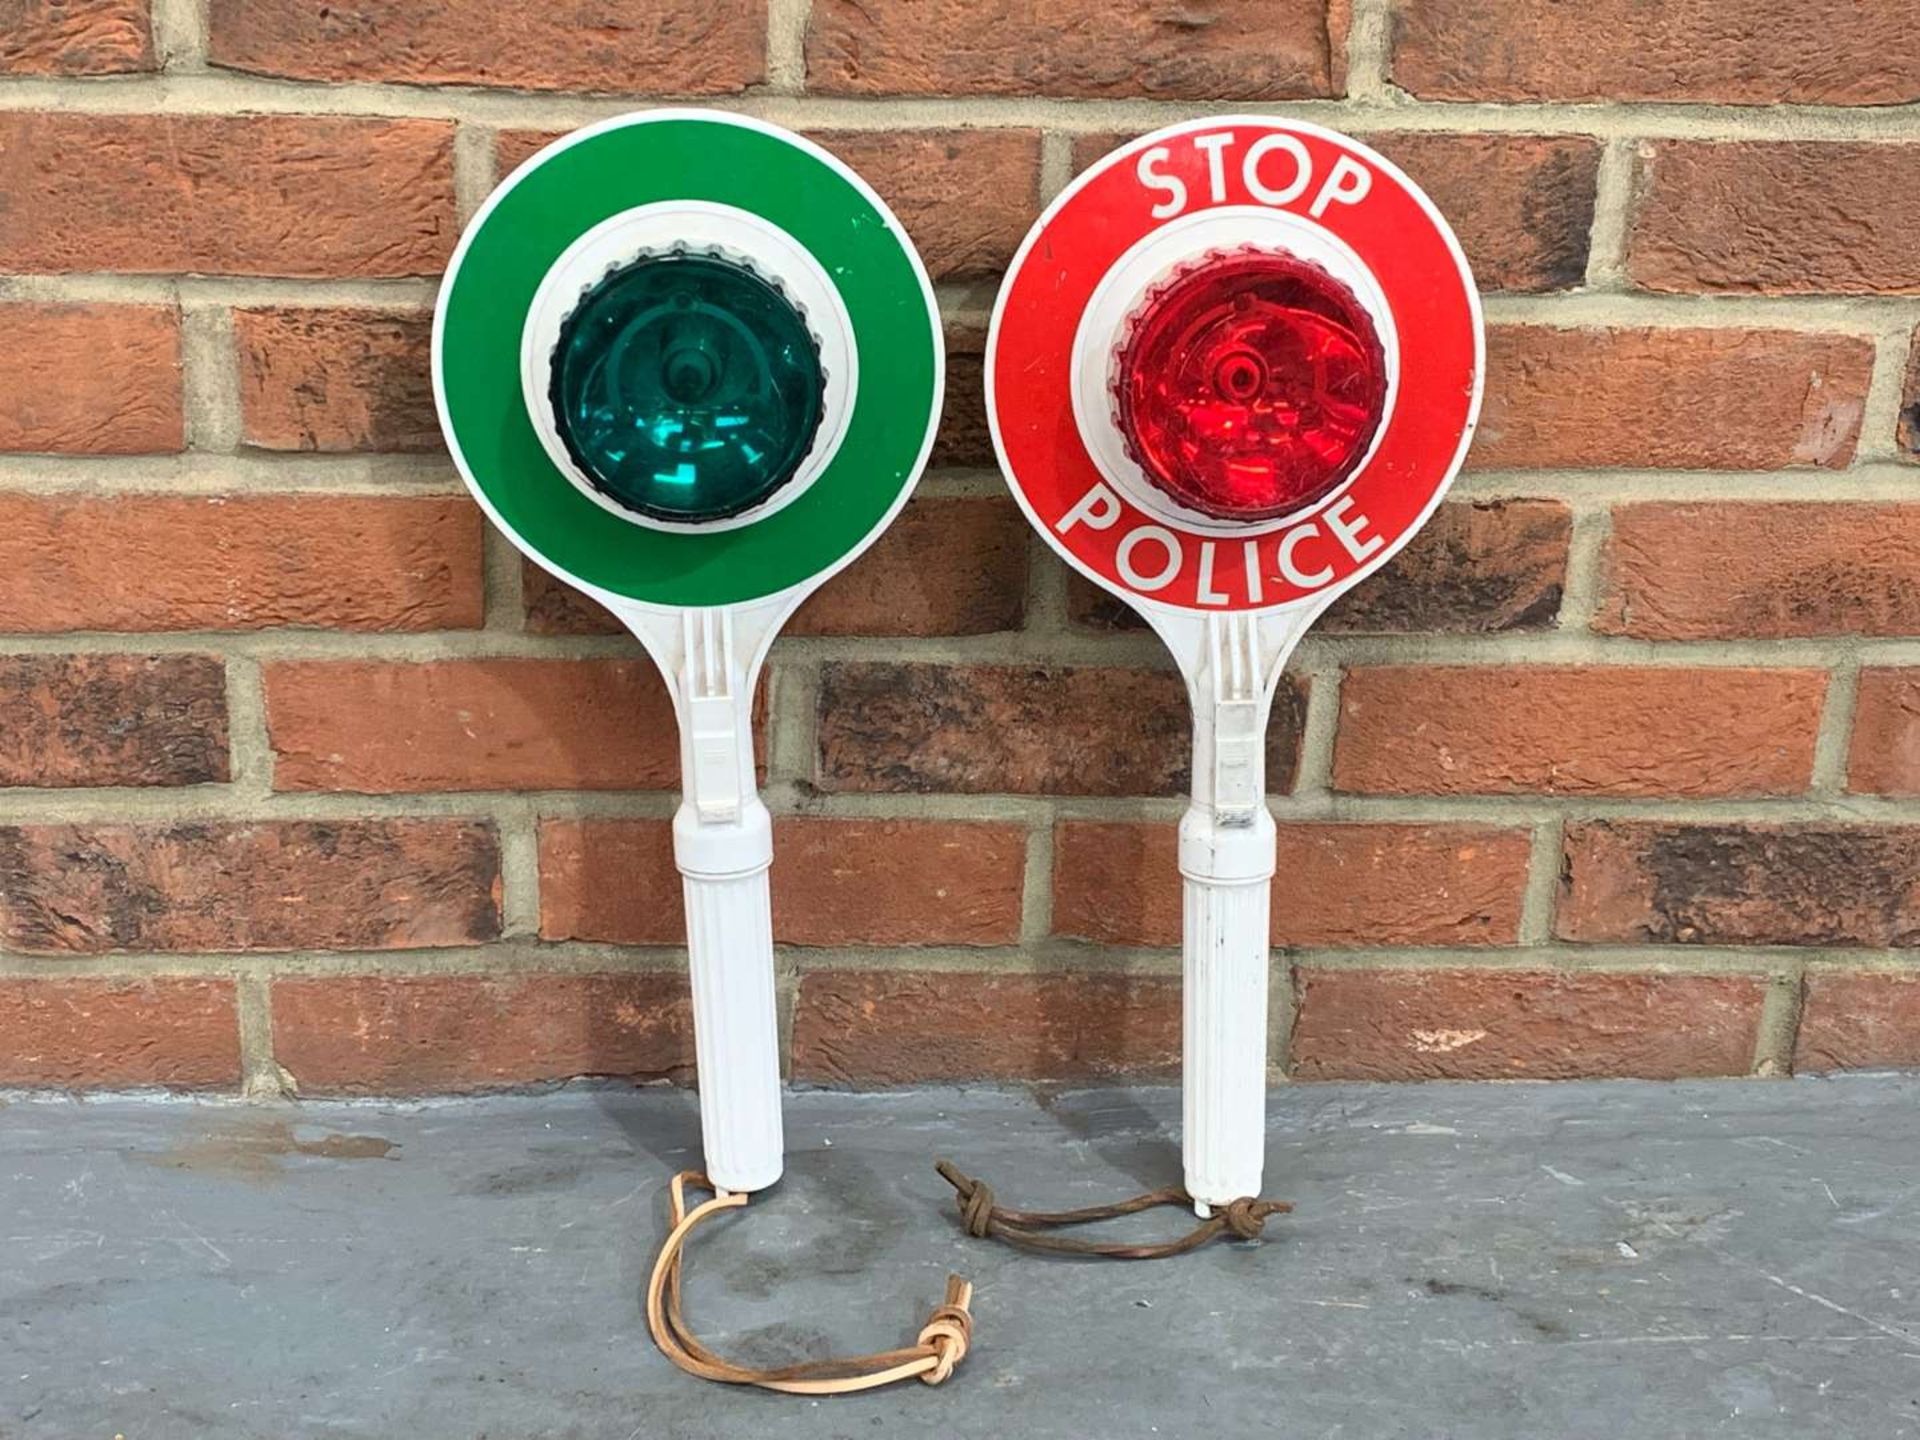 Two Police Hand Stop/Go Signals&nbsp; - Image 2 of 2